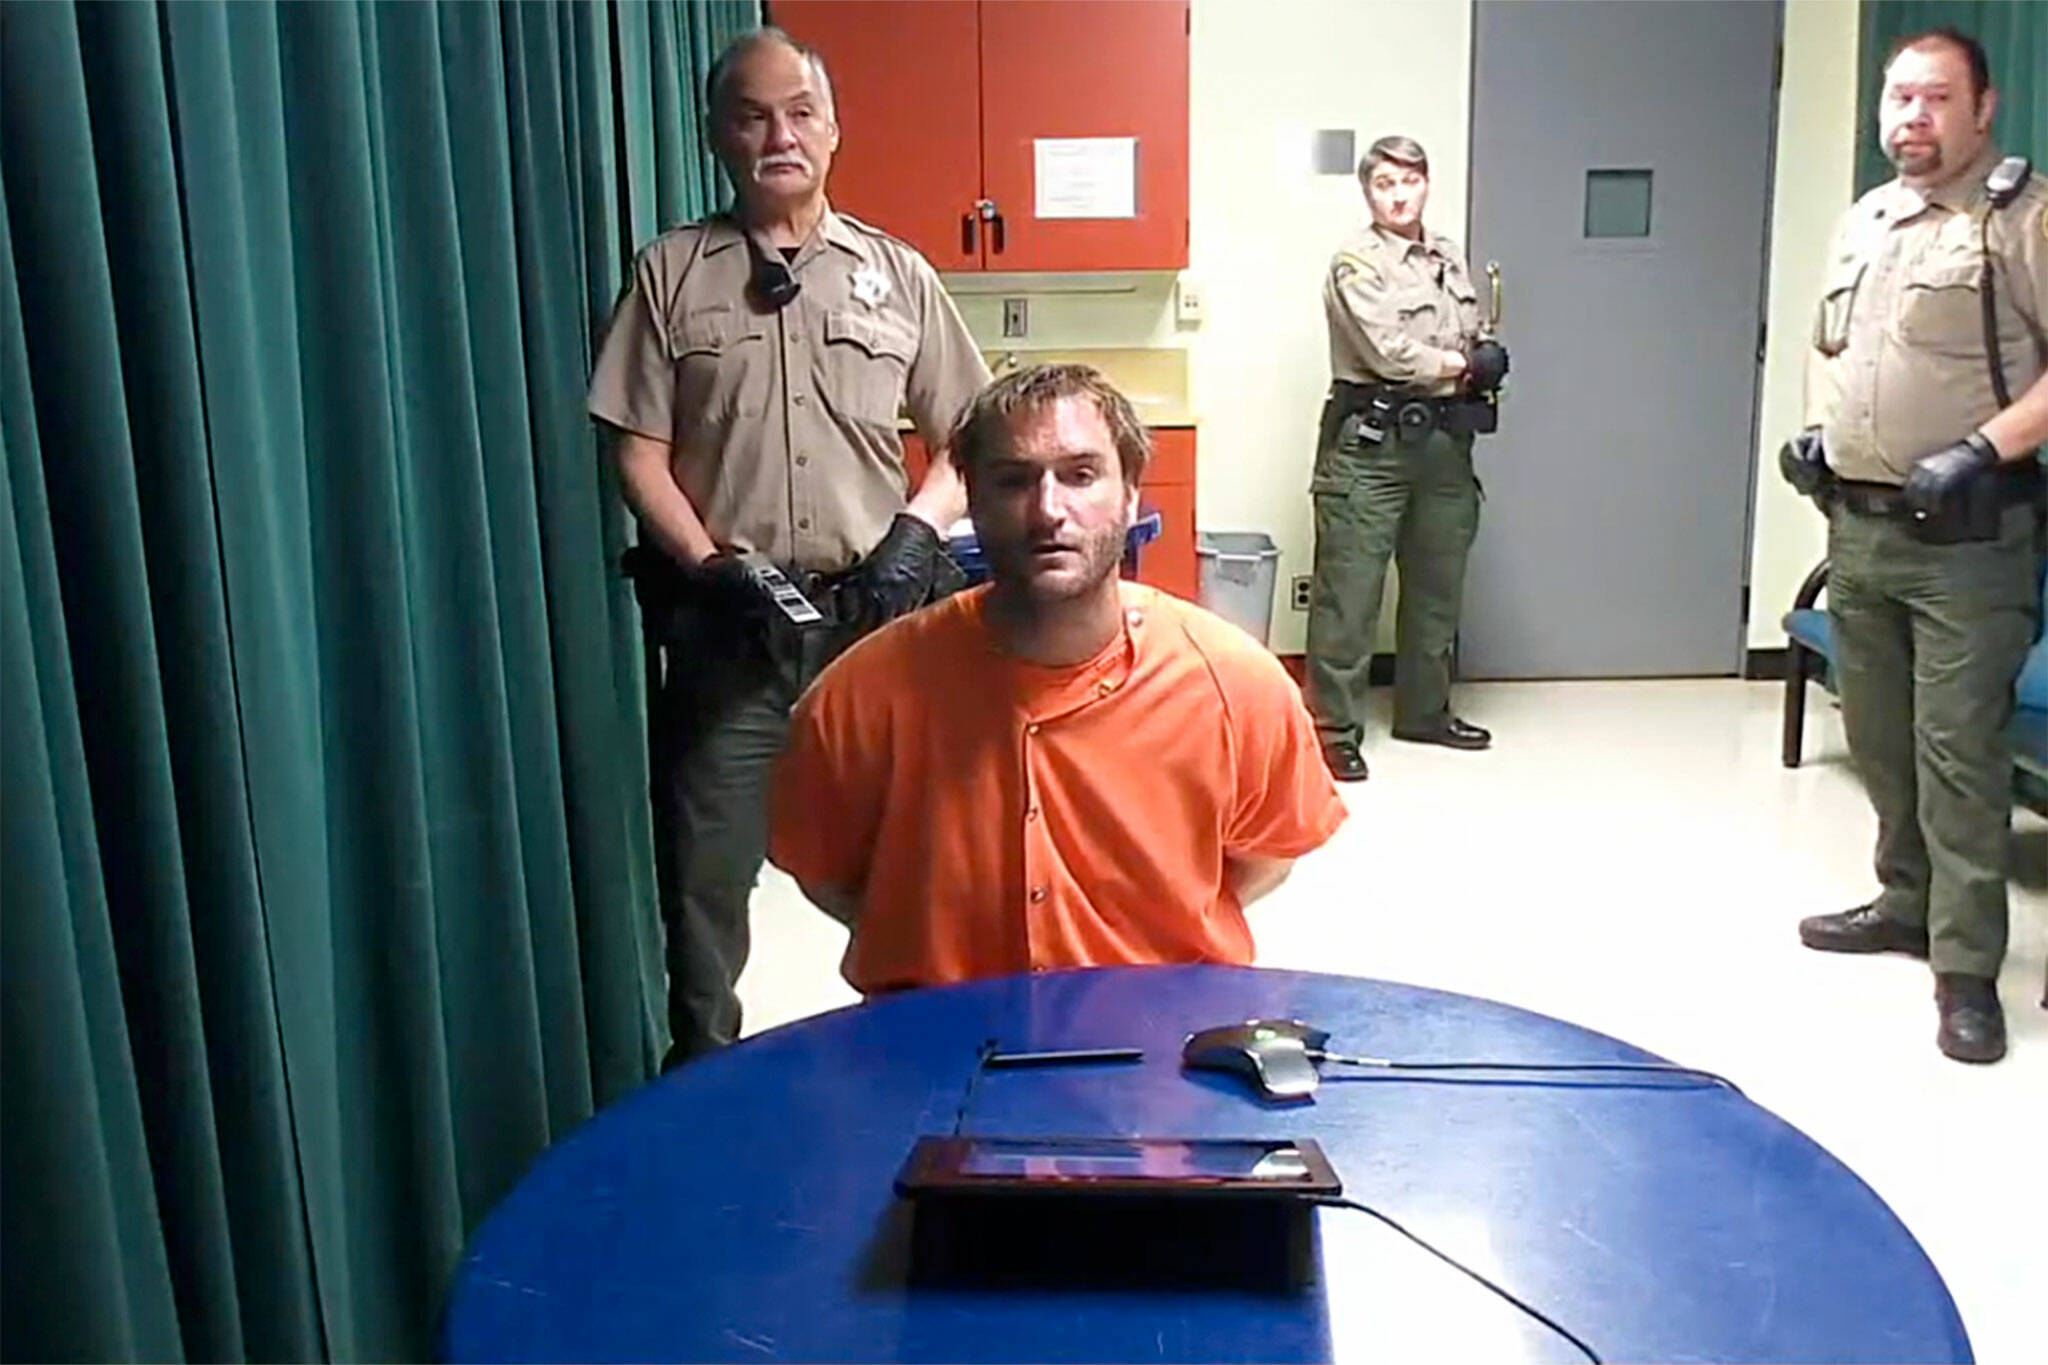 Bret Allen Kenney, 34, appears in Clallam County Superior Court on May 24 via video to be formally charged with attempted second-degree murder, assault on a police officer, disarming a police officer and driving under the influence of drugs. His bail was revoked and his arraignment is set for June 3.